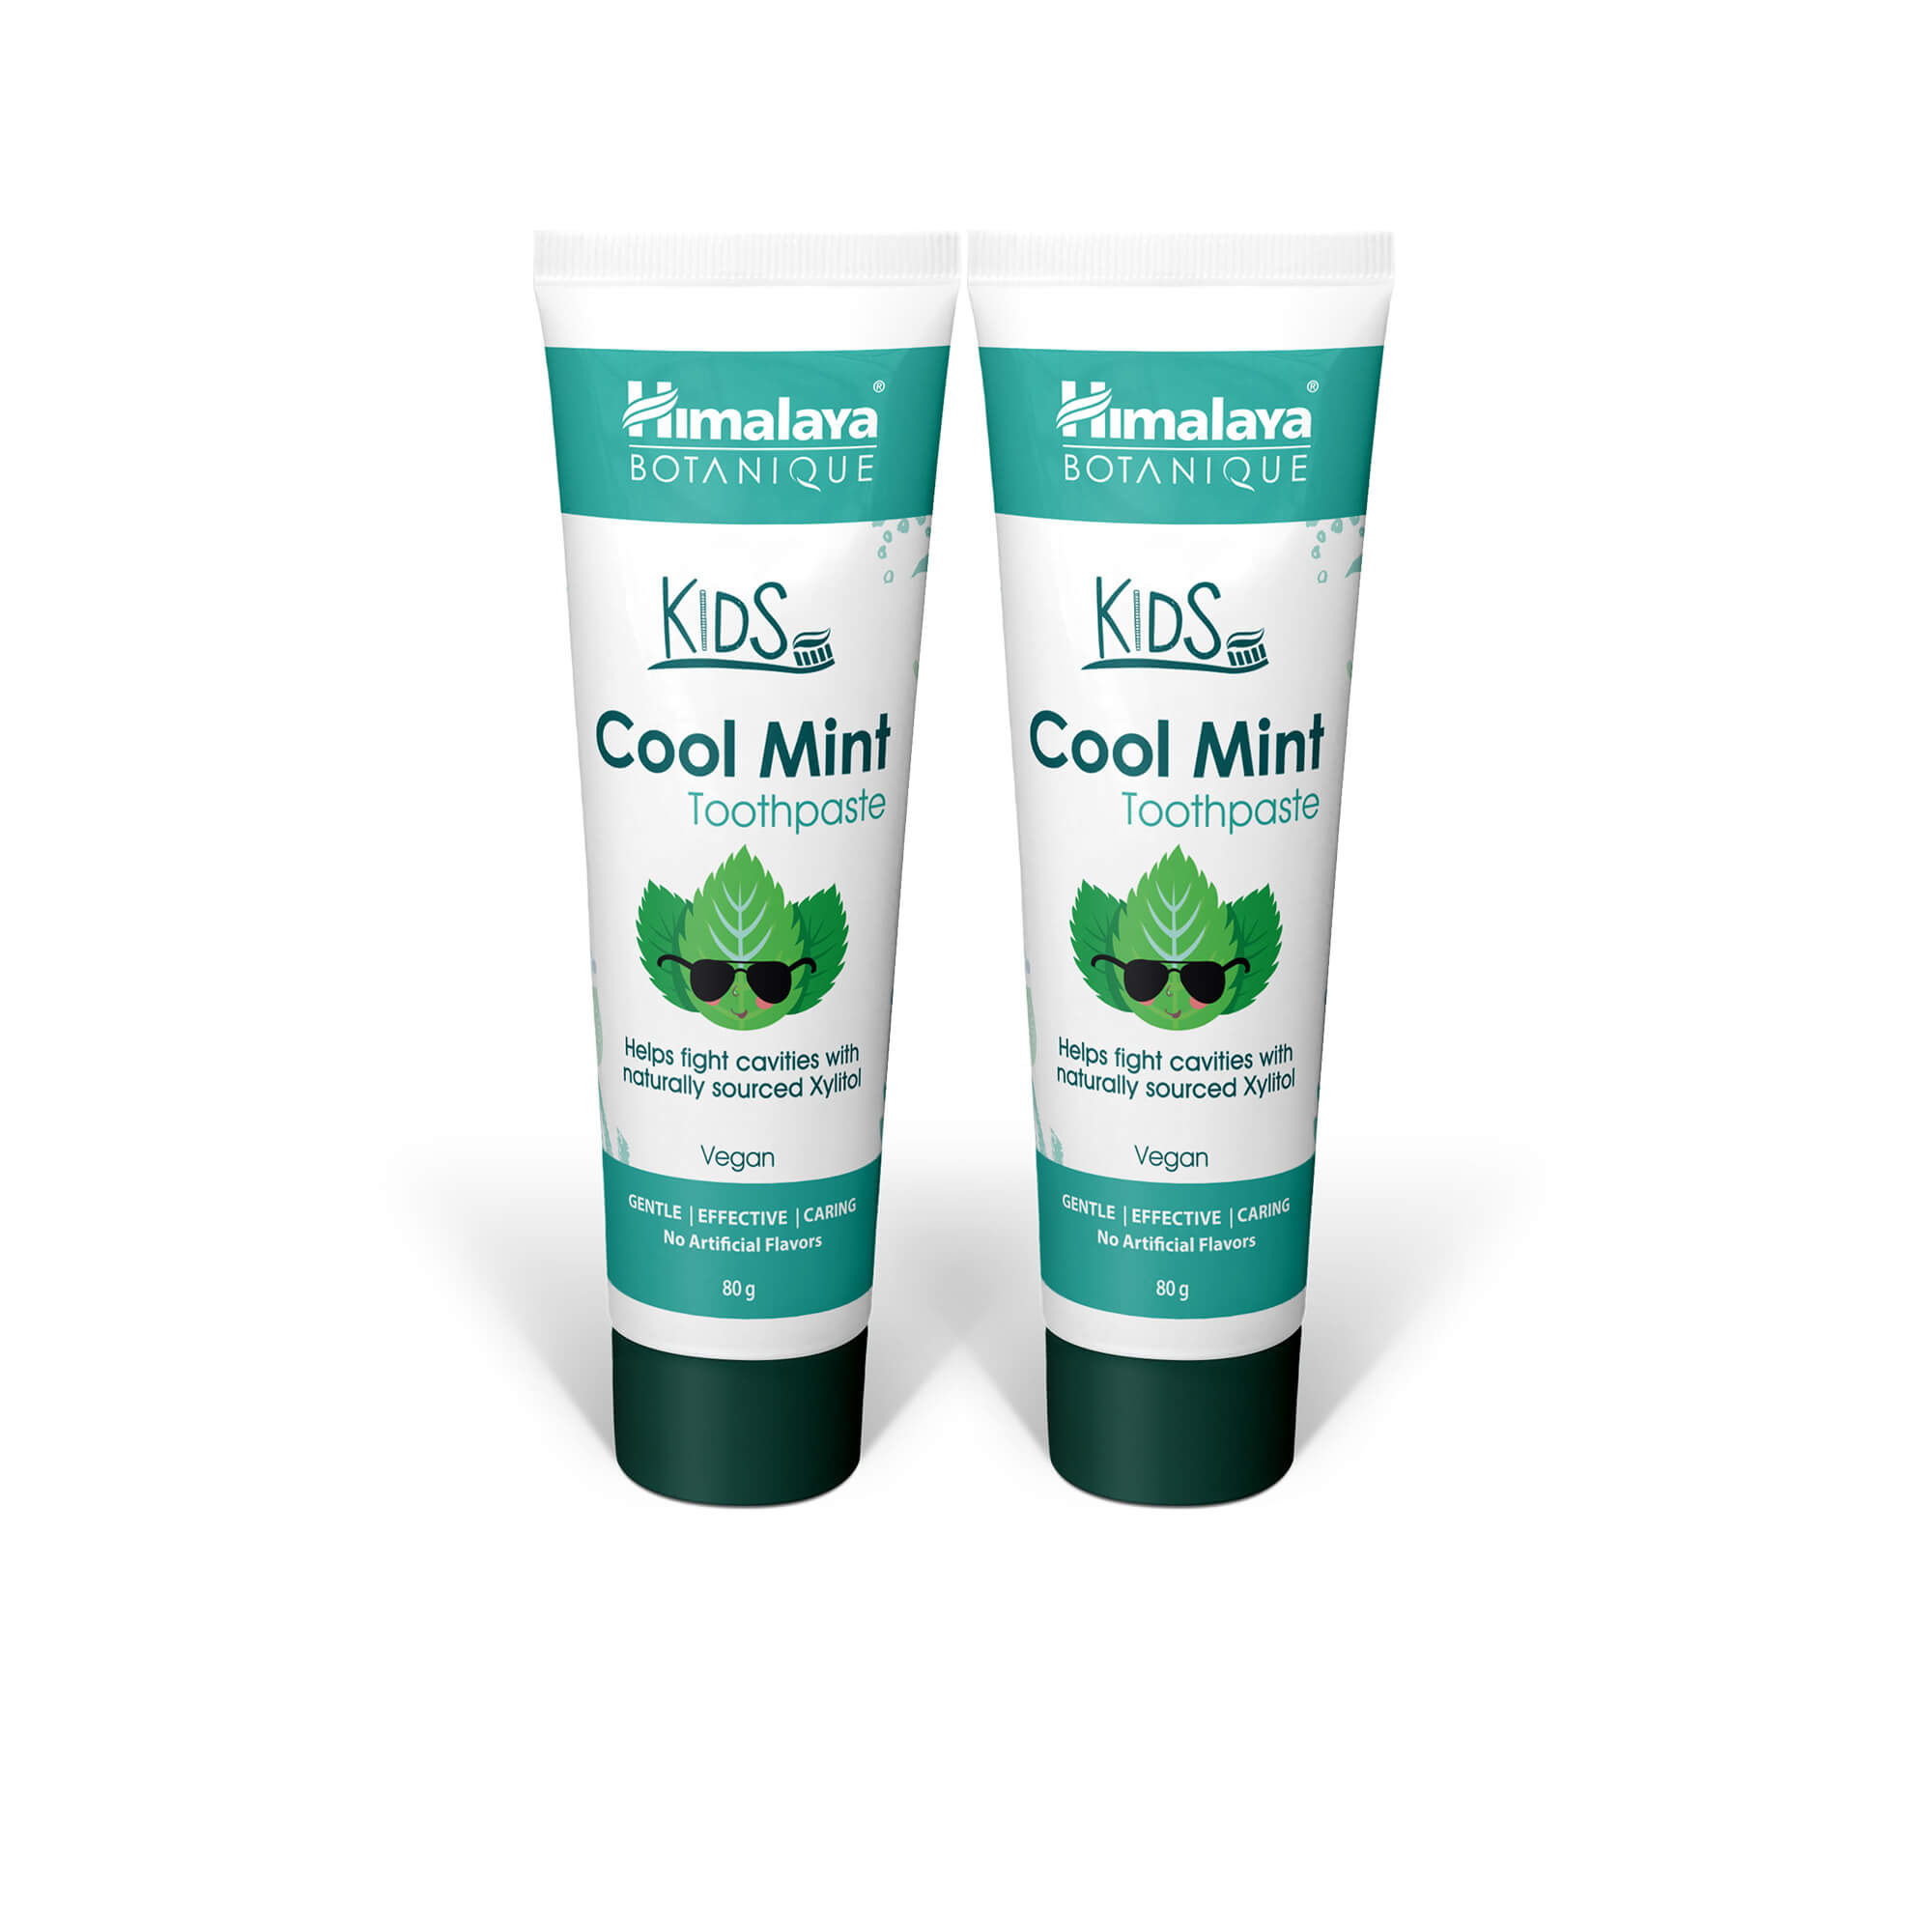 Himalaya Kids Cool Mint Toothpaste - 80g (Pack of 2)